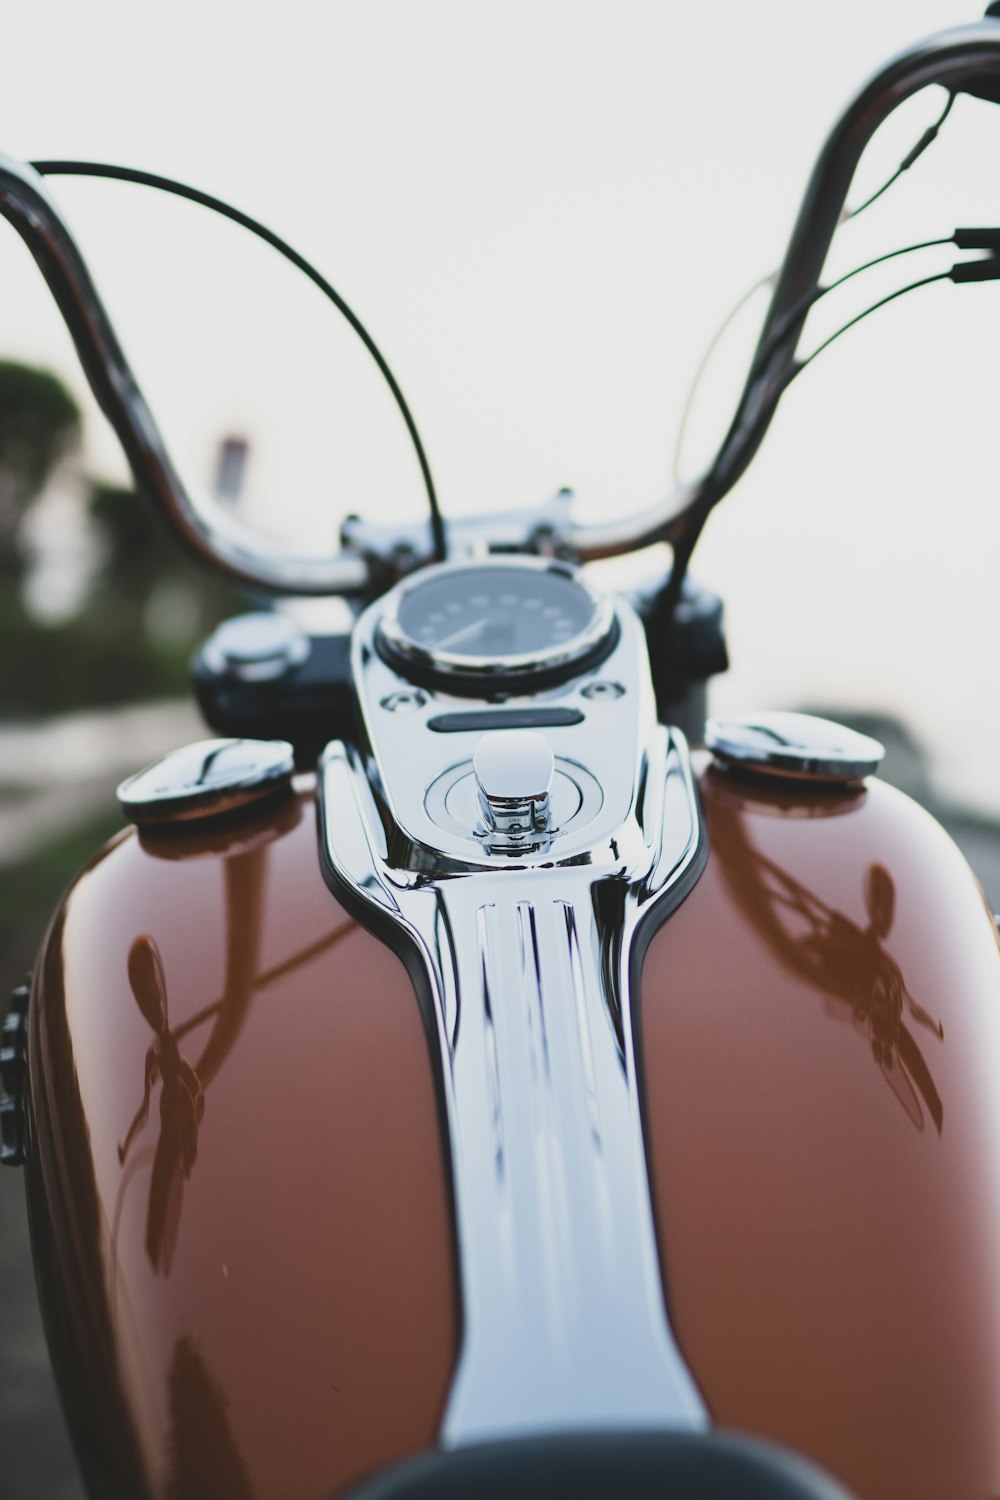 red and silver motorcycle in tilt shift lens